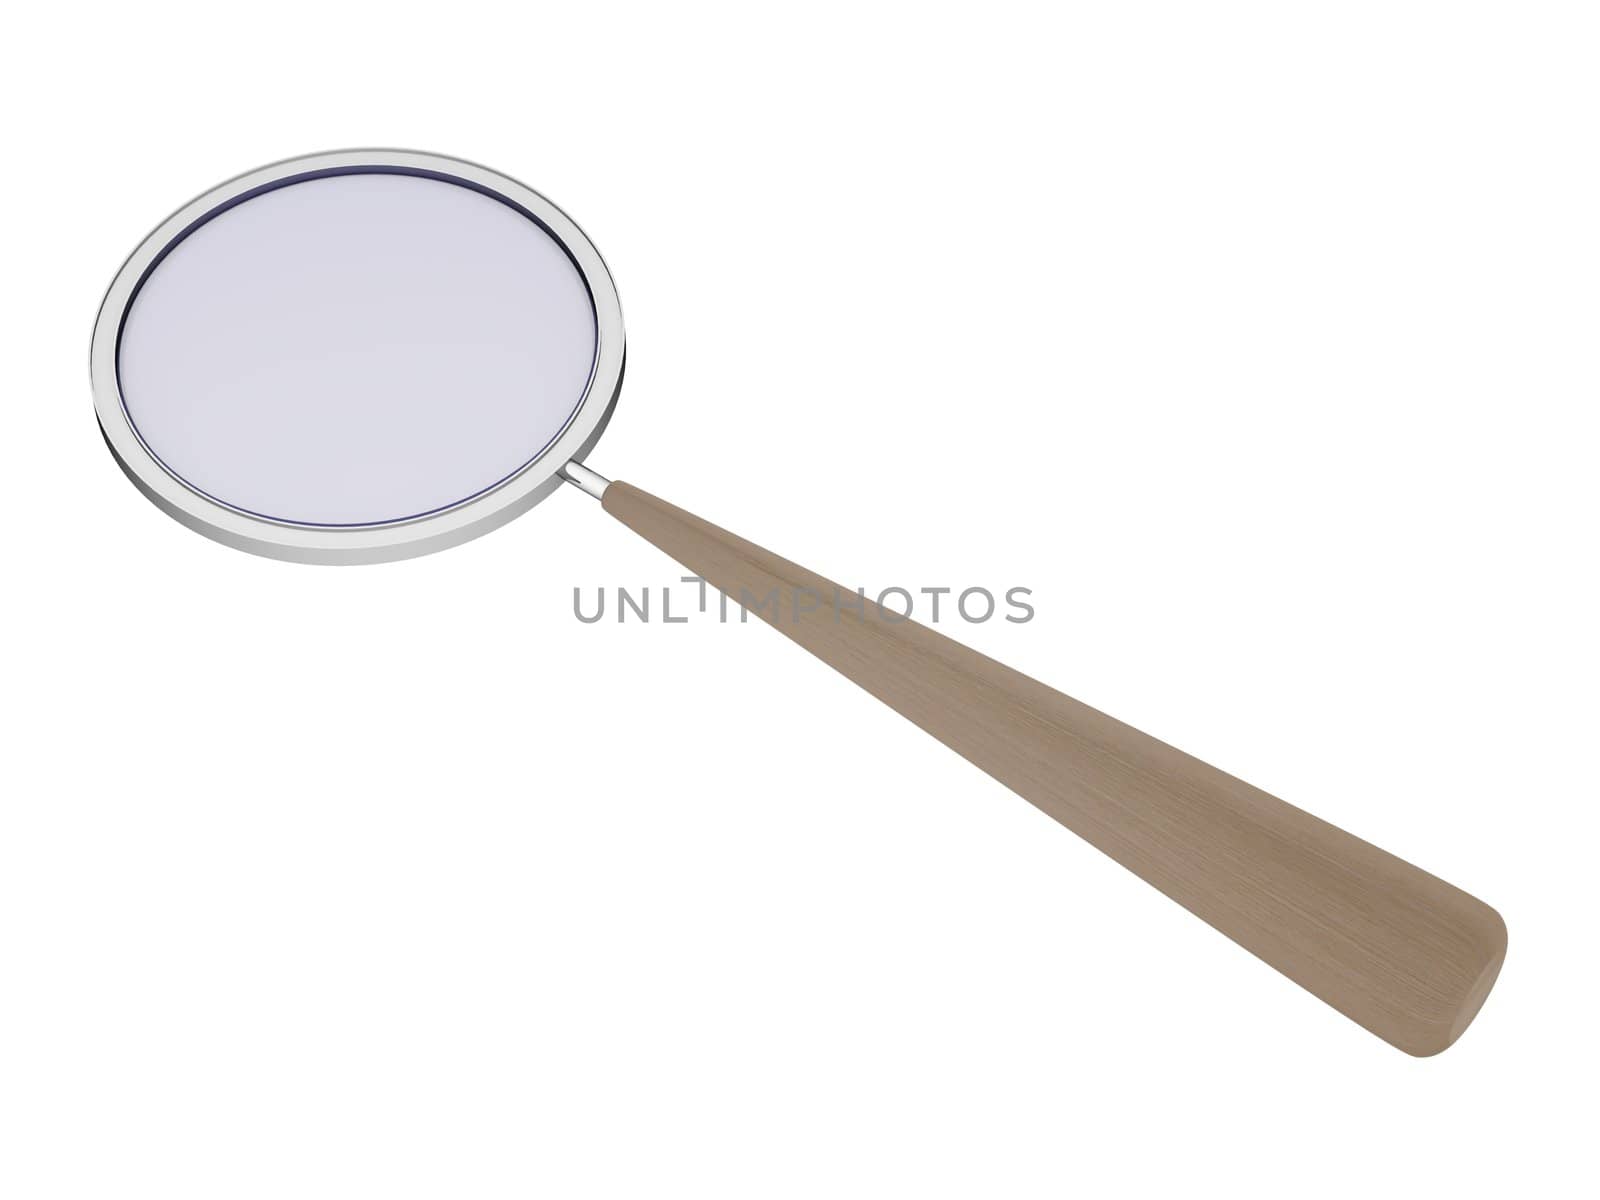 Loupe. Magnifying glass. Isolated tool. 3D image. by ISerg